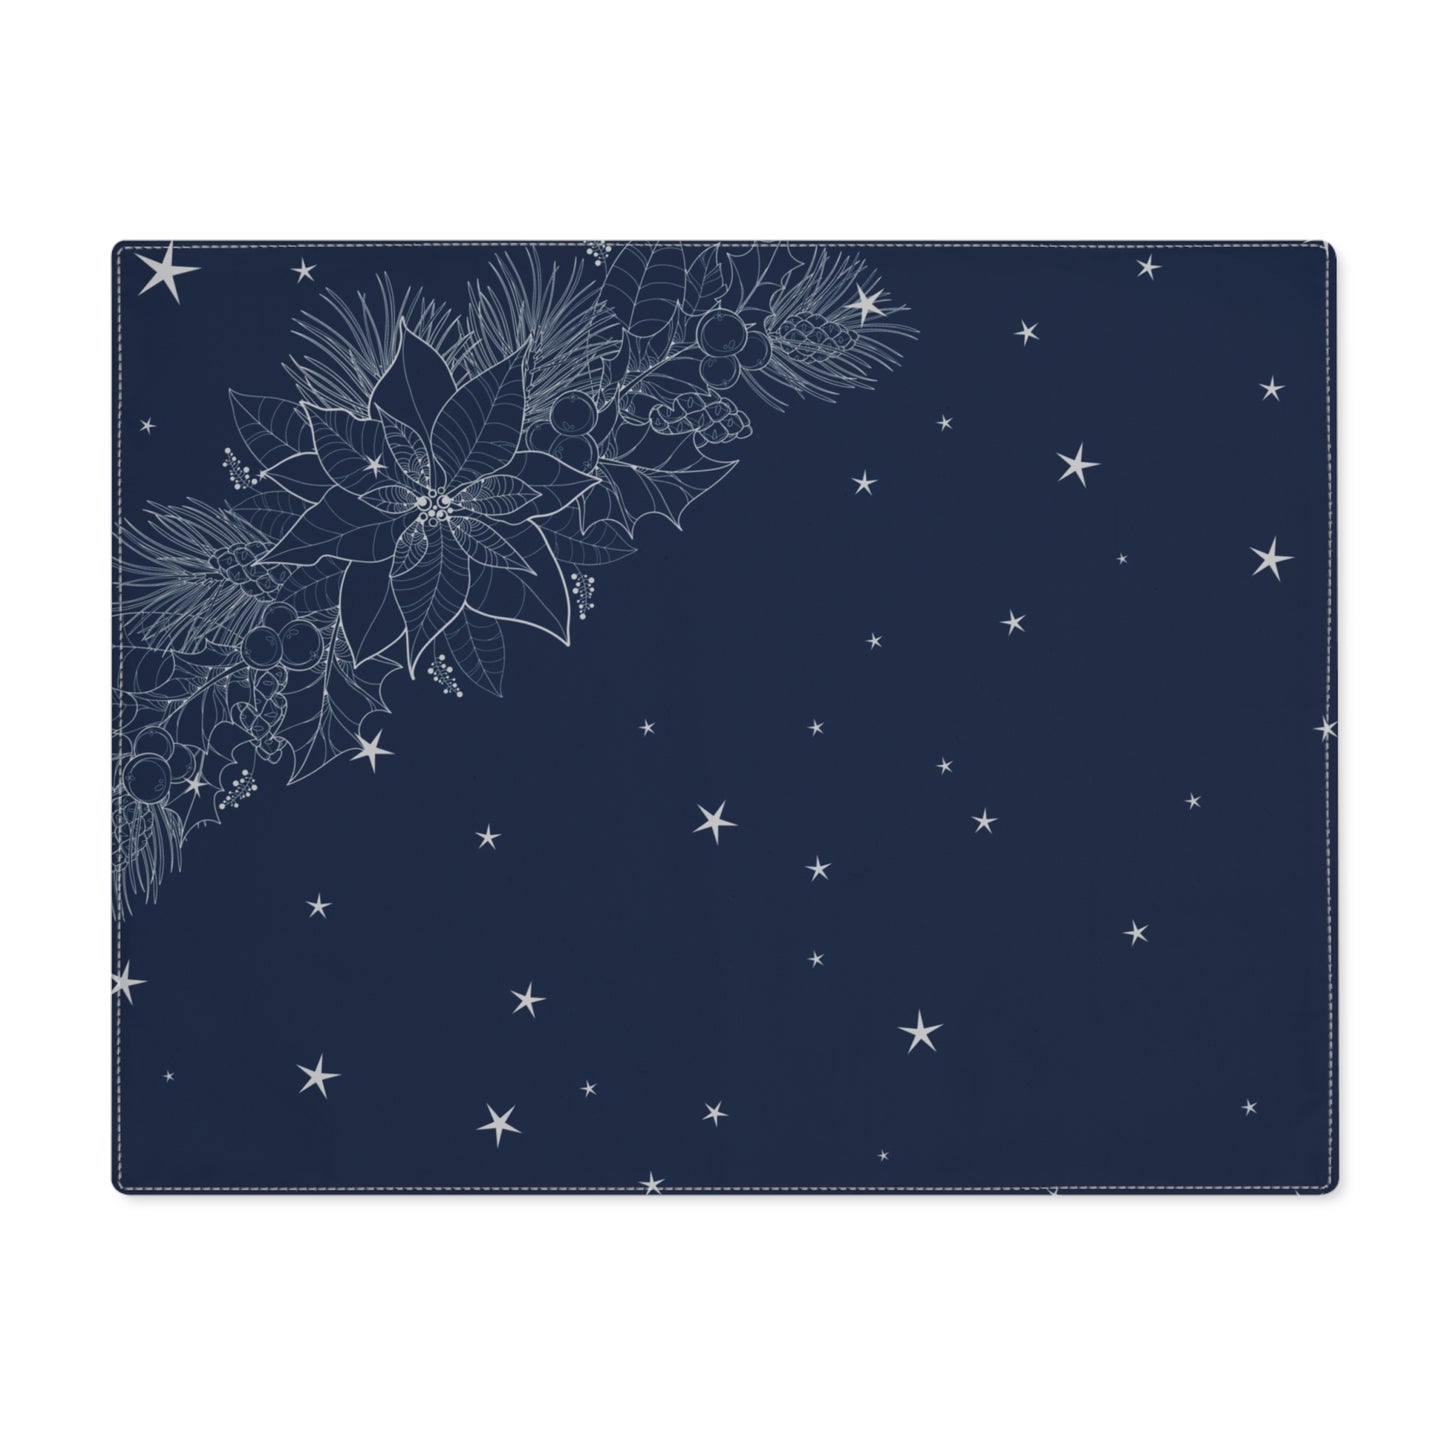 Dark Blue and Silver Pinecones and Poinsettias with Stars Christmas Placemat, 1pc